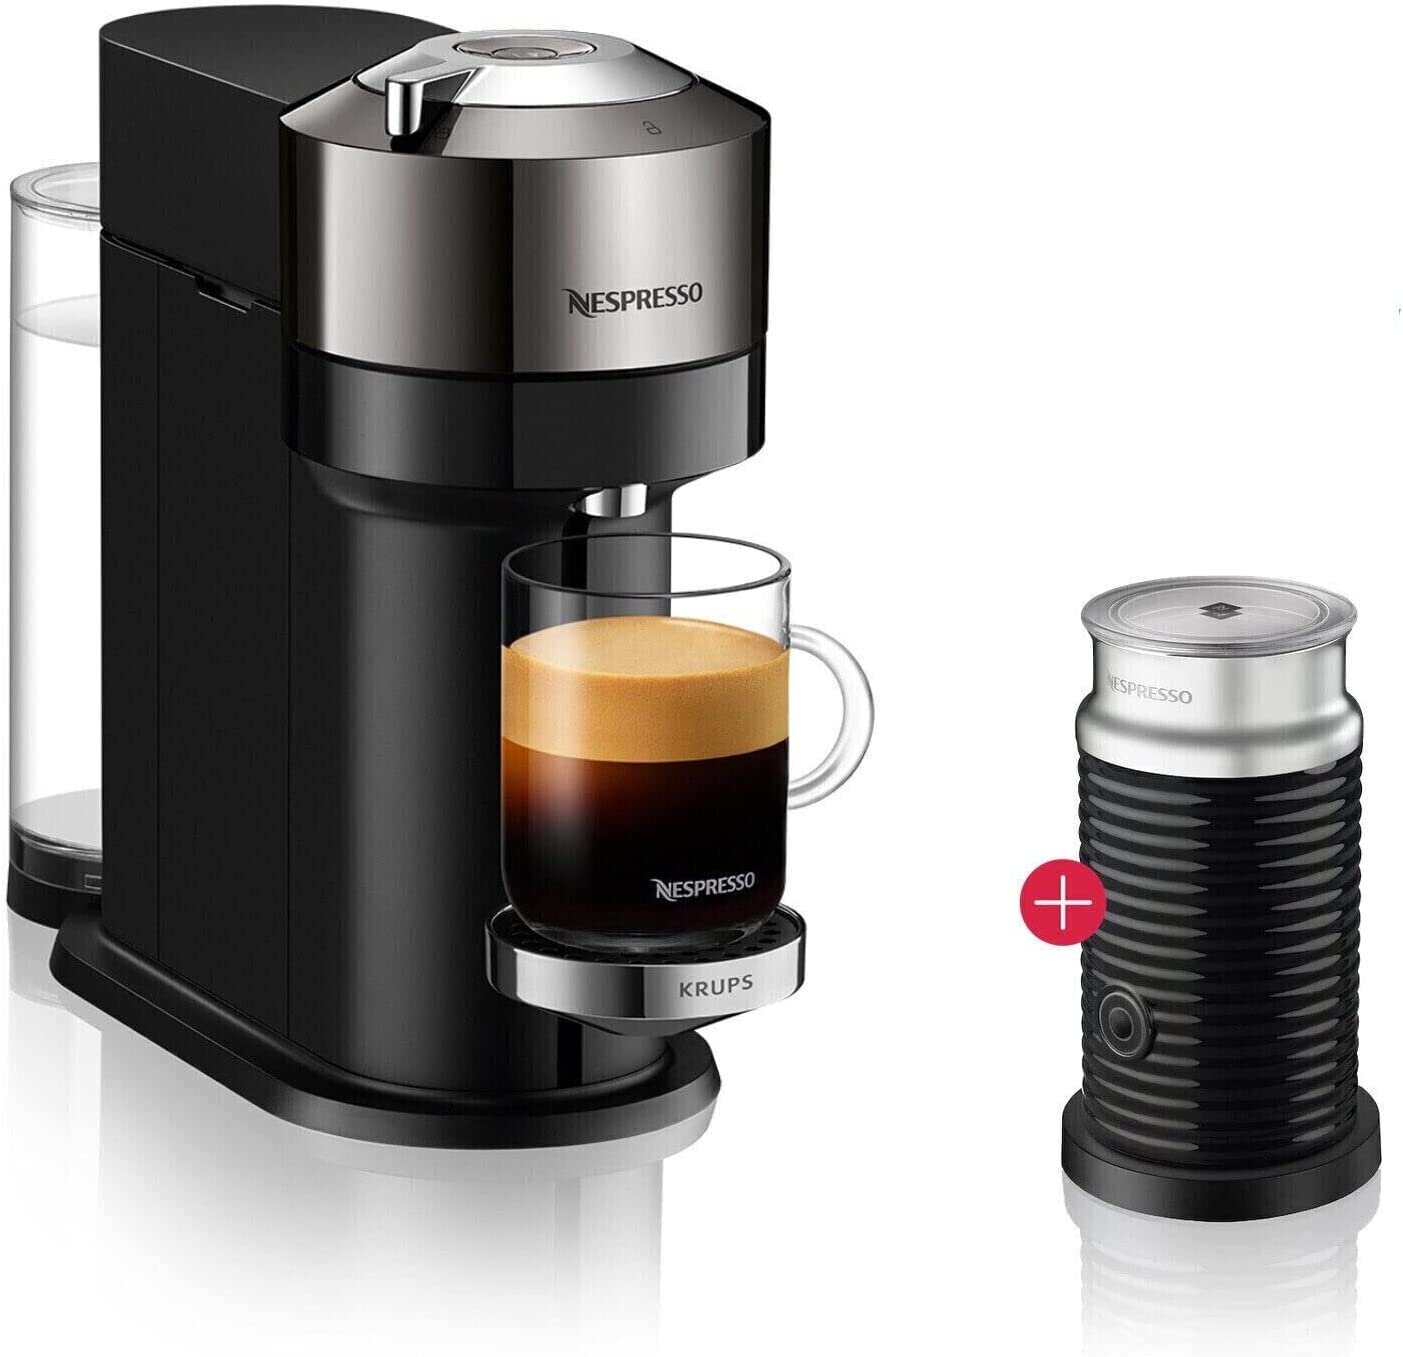 Nespresso Krups Vertuo Coffee Machine, Coffee Capsule Machine With Aeroccino 3 Milk Frother, Automatic Shut-Off, Short Heating Time, Six Cup Sizes, Easy Preparation, Space Saving